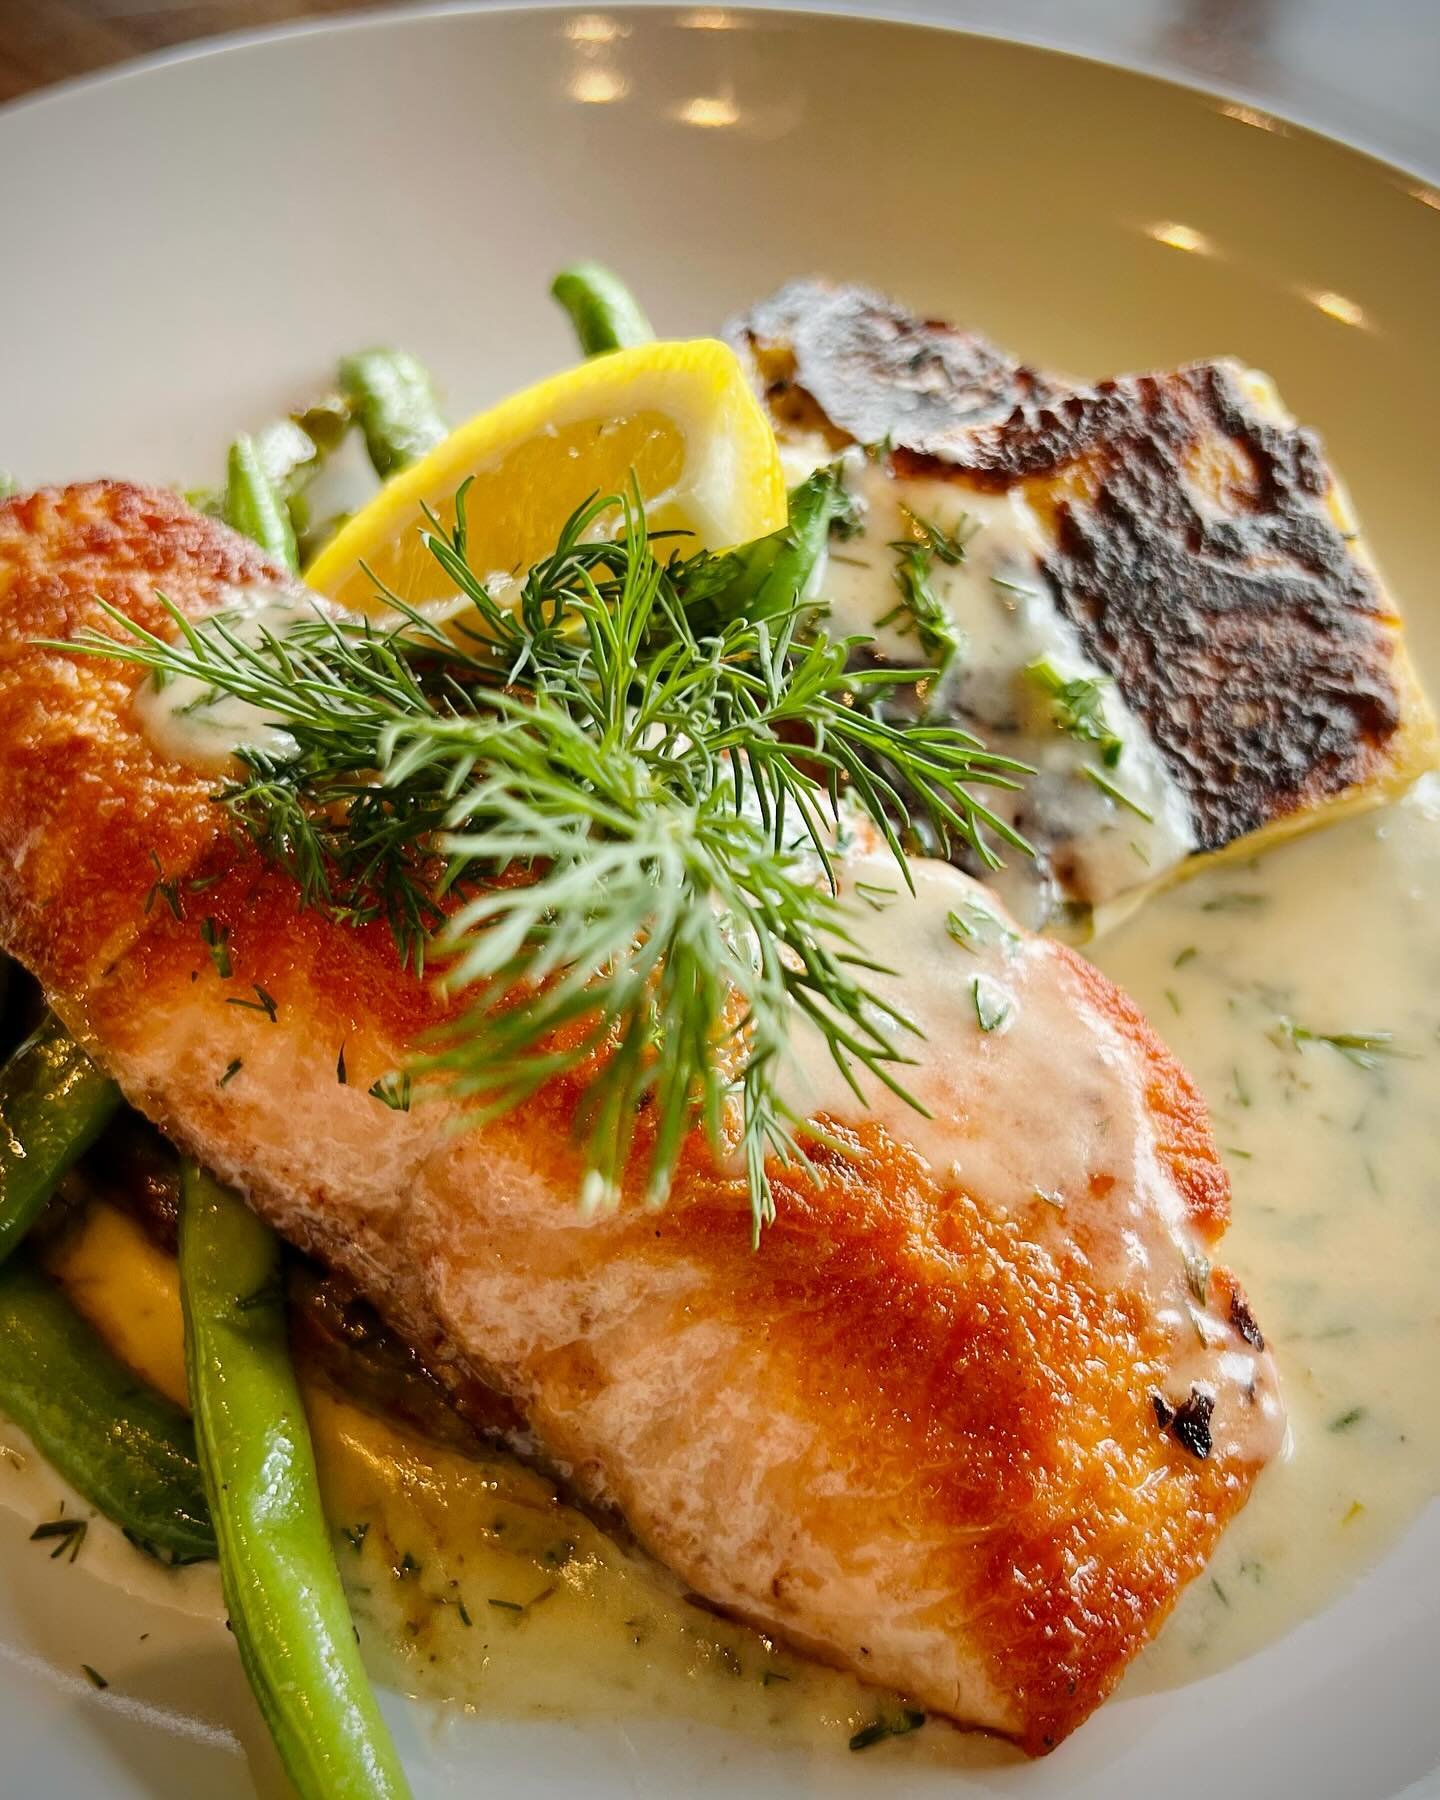 For this weekend at FoodSmith enjoy a simple classic dish, pan roasted salmon, with creamy au gratin, green beans and white wine dill sauce
#salmon #fridaydinner #wsp #weststpaulmn  #foodsmithpub #cheflife #localbusiness